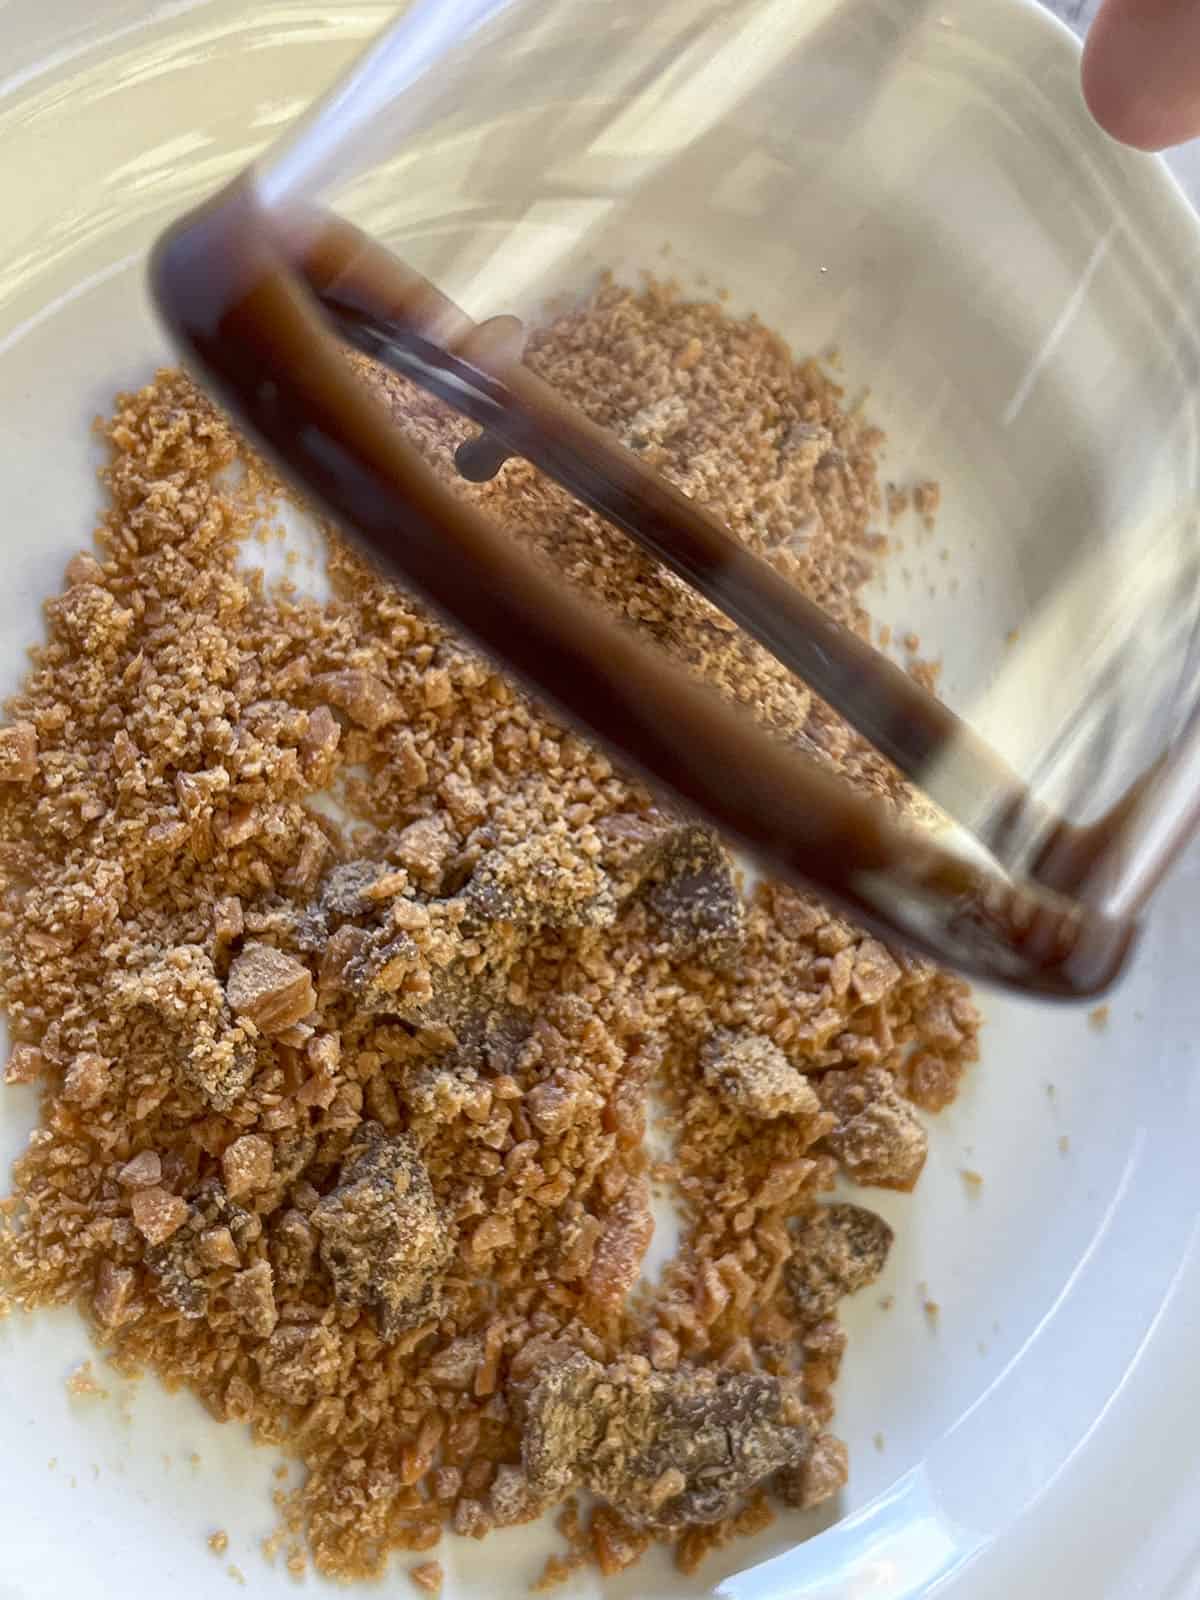 The syrup rimmed shotglass being dipped into crushed butterfinger candy.